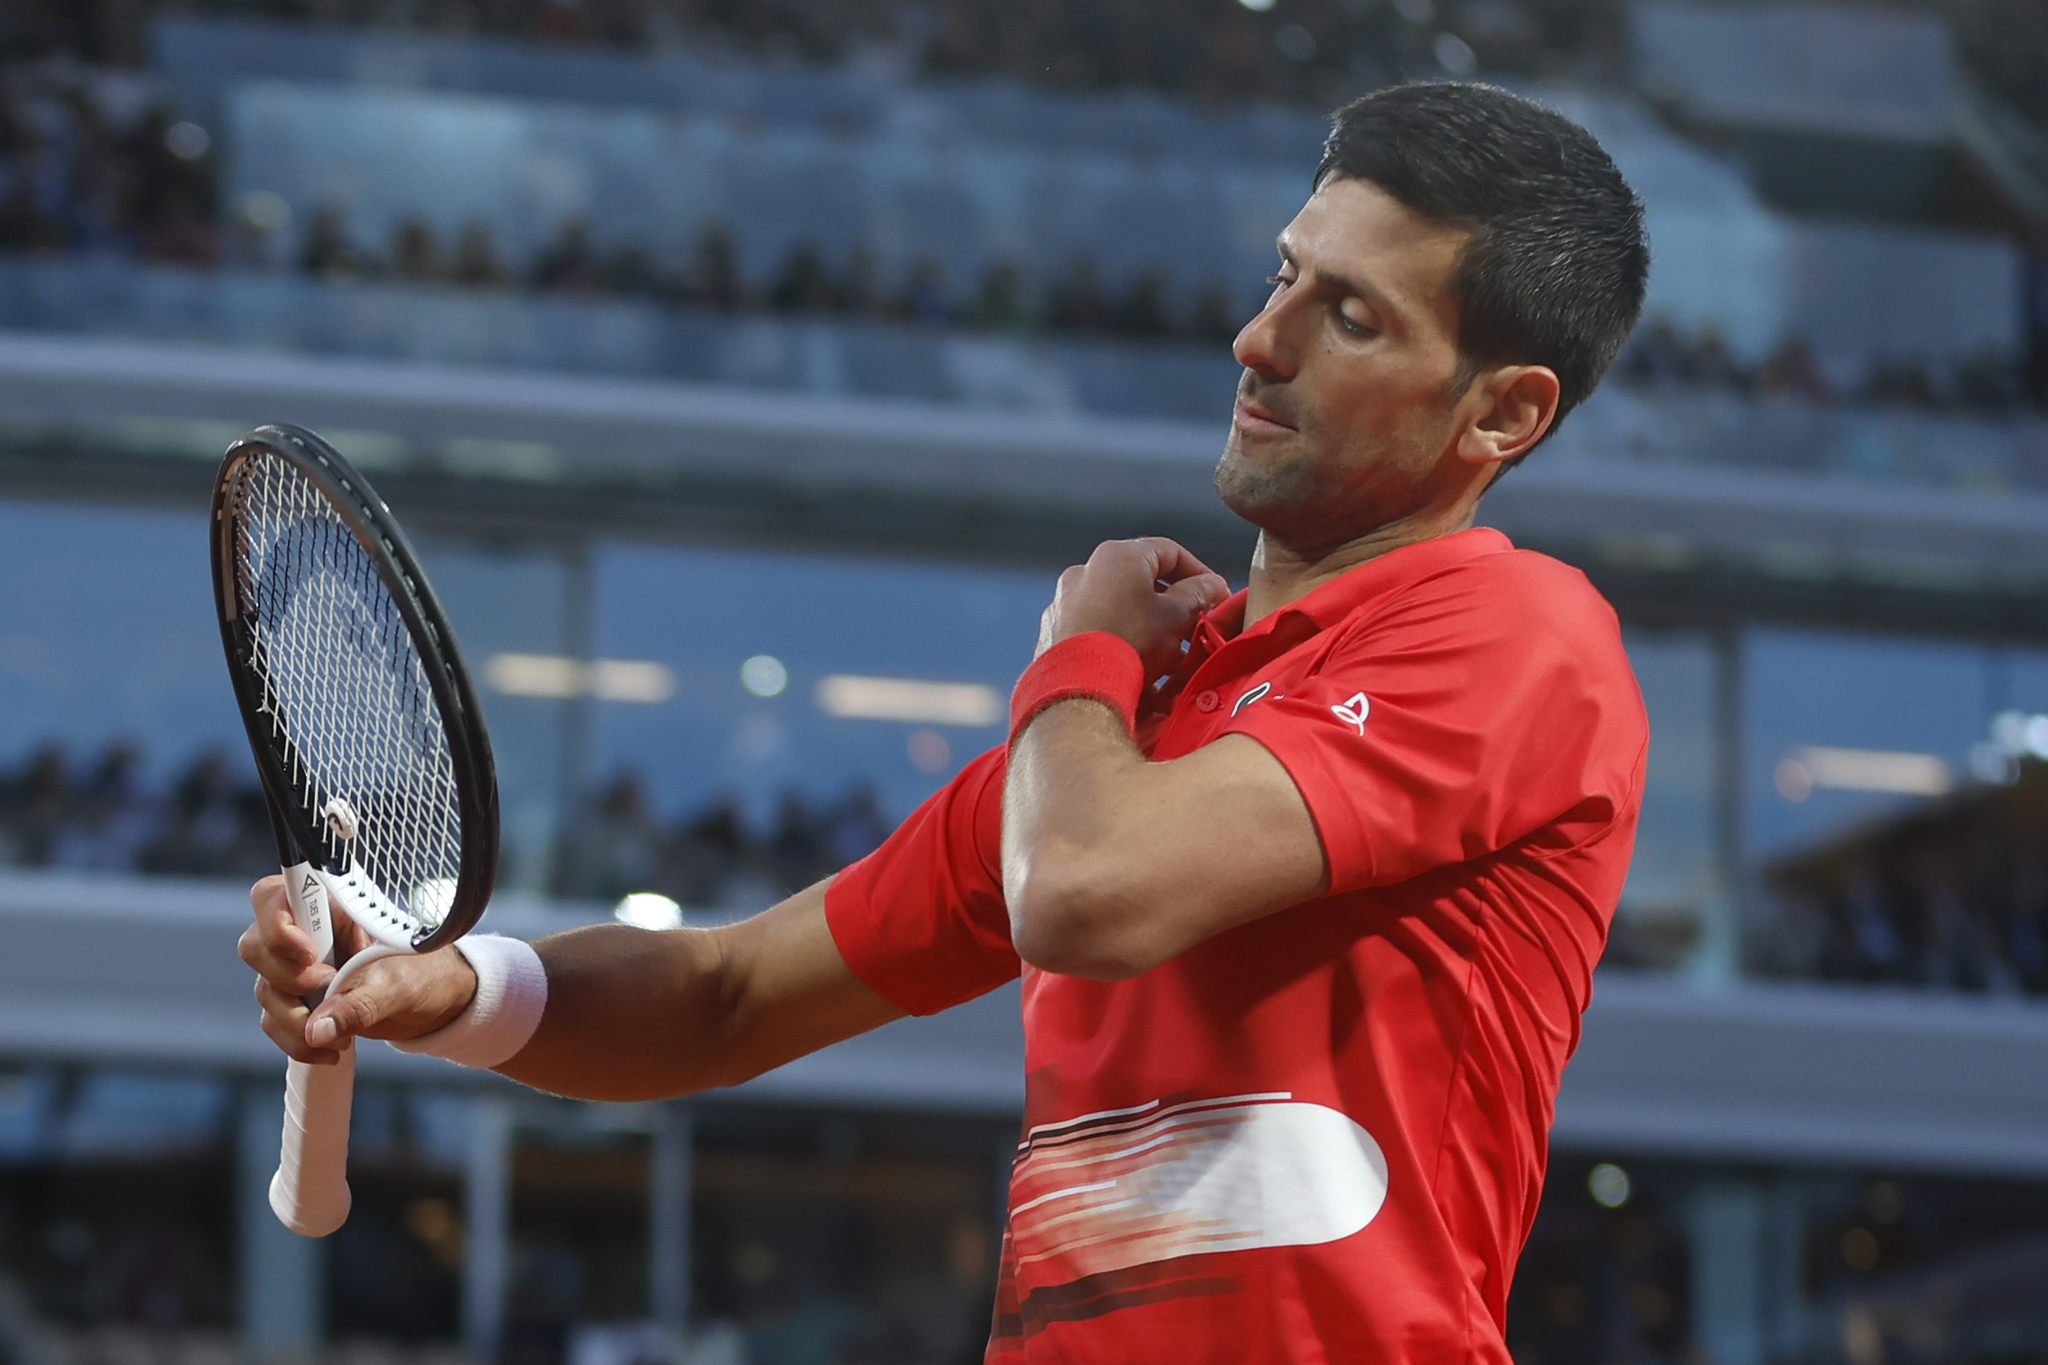 Serbia's Novak Djokovic looks at his racket as he plays Spain's Rafael  lt;HIT gt;Nadal lt;/HIT gt; during their quarterfinal match of the French Open tennis tournament at the Roland Garros stadium Tuesday, May 31, 2022 in Paris. (AP Photo/Jean-Francois Badias)